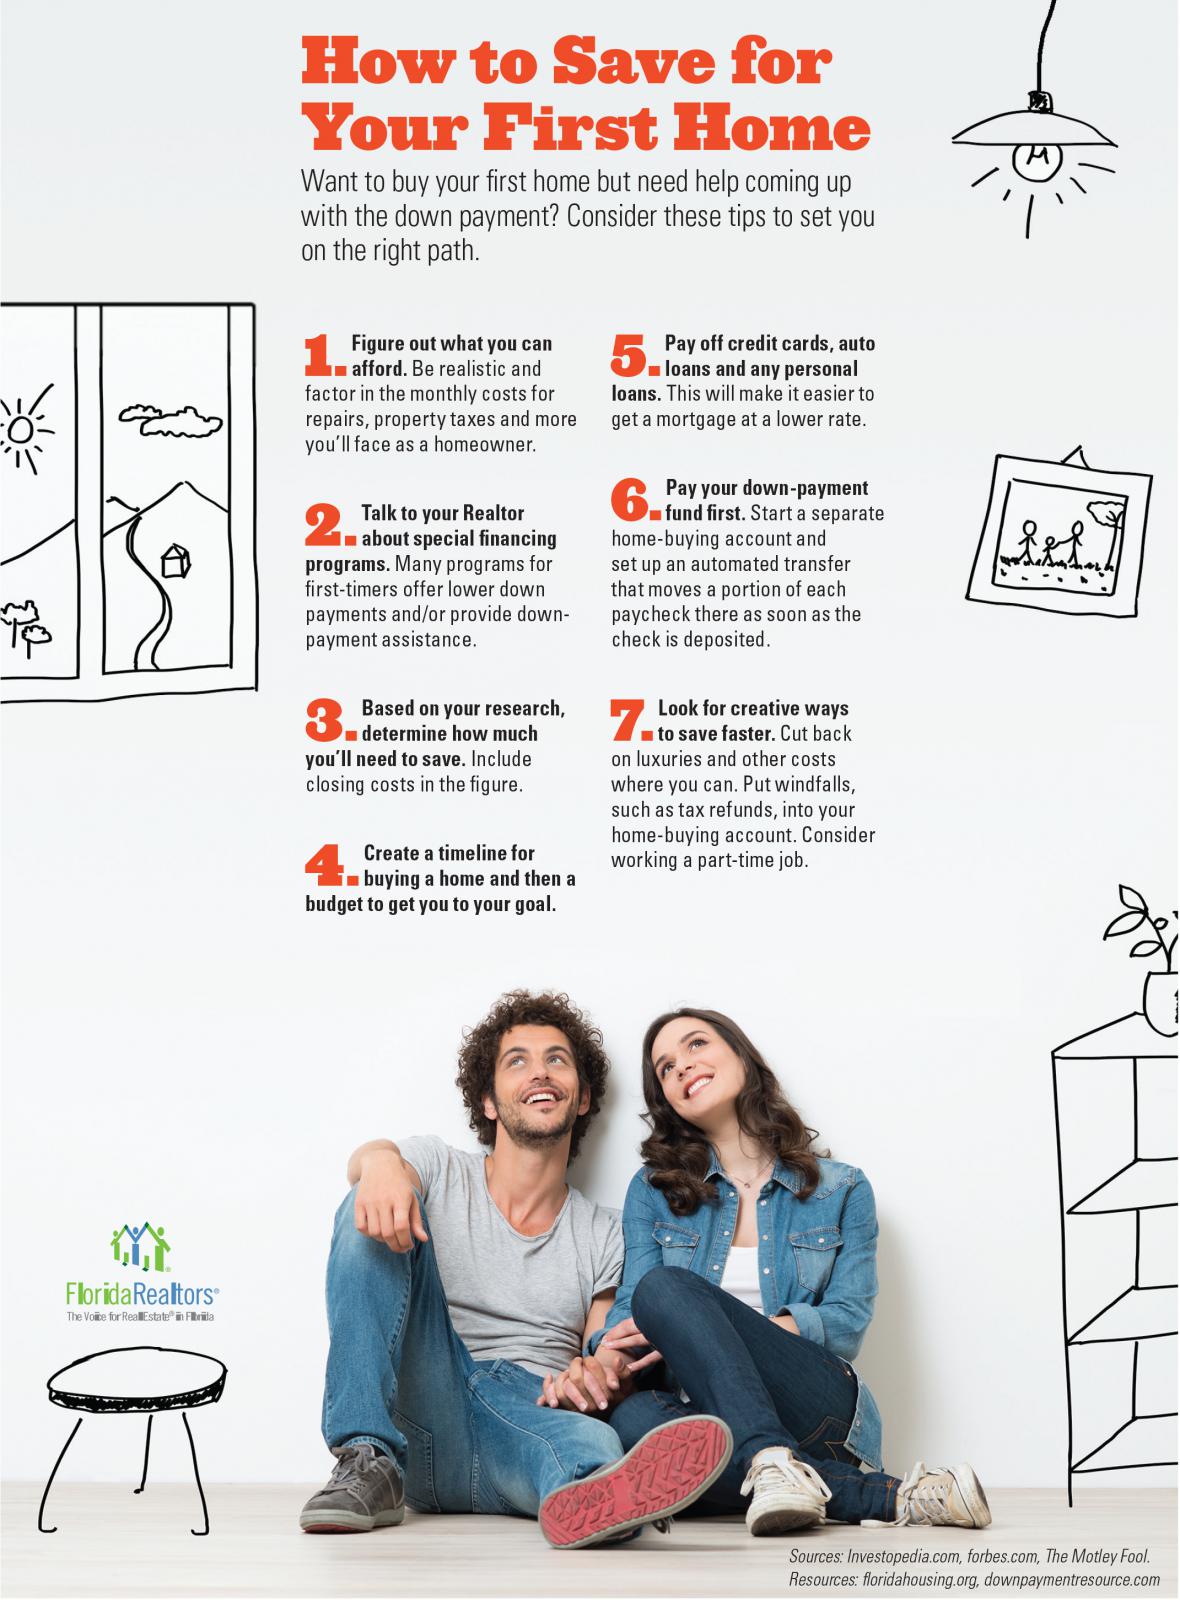 How to Save for Your First Home